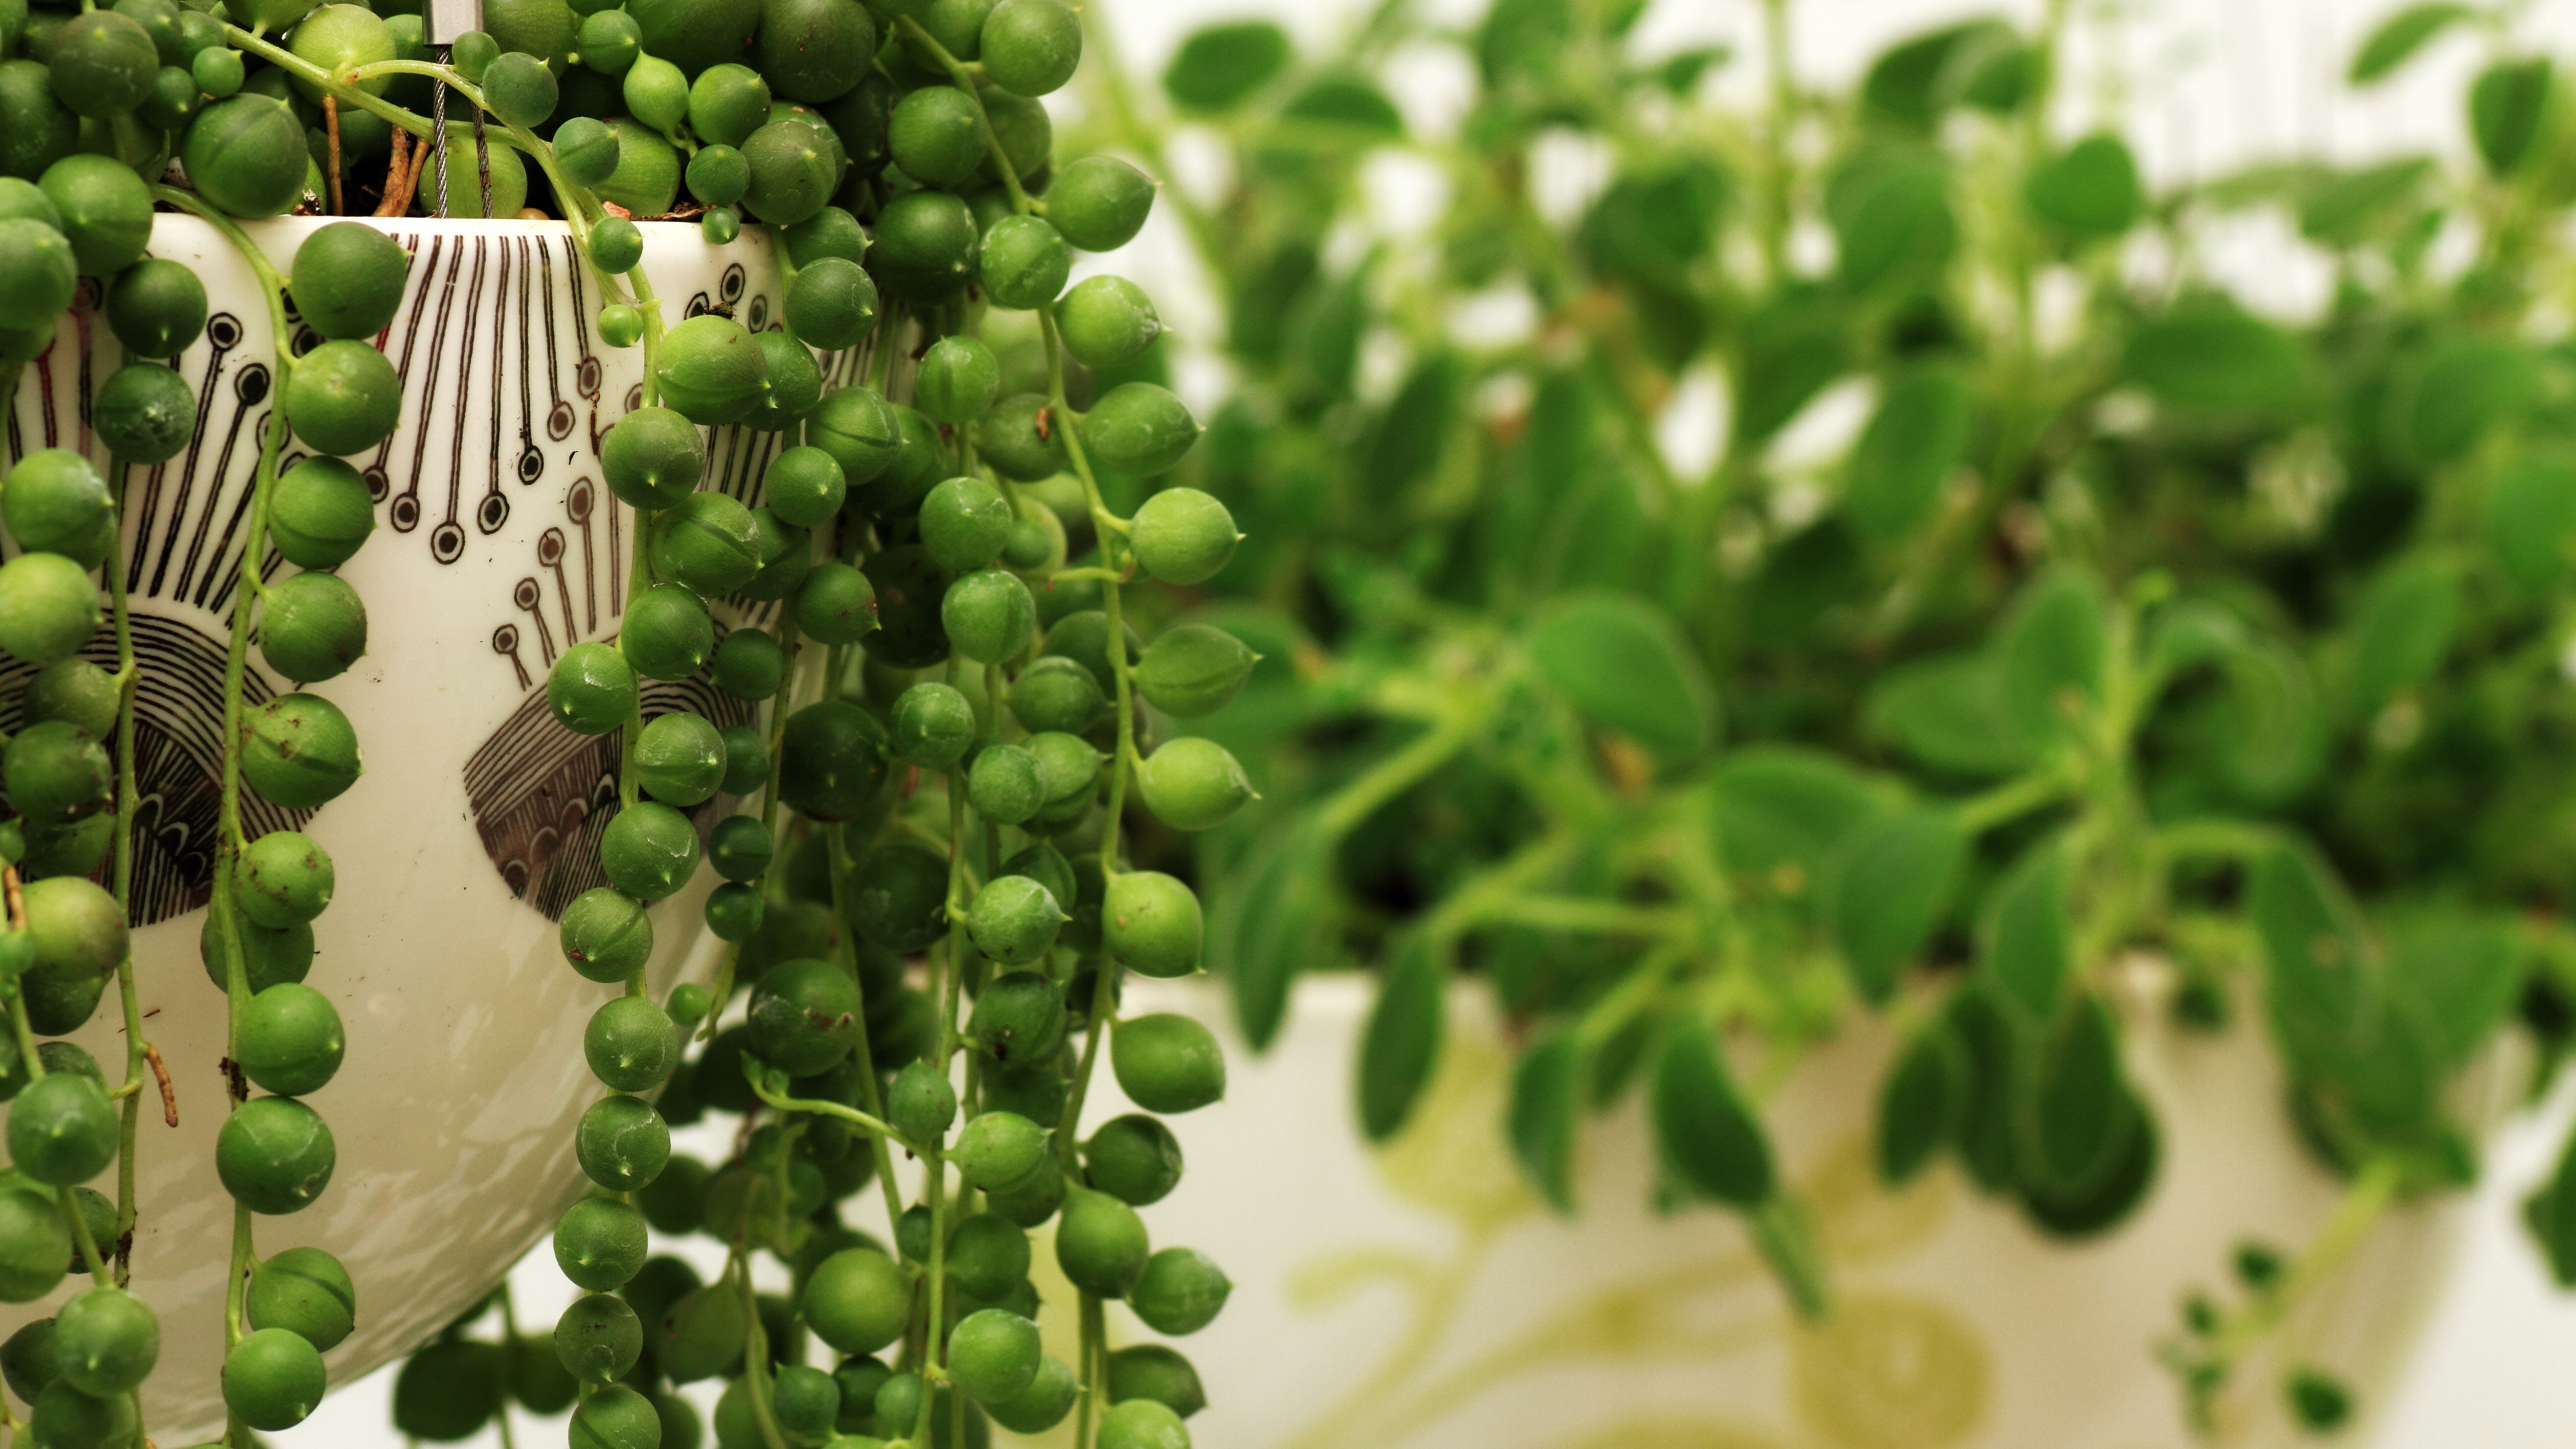 How to Care For String Of Pearls: A Beautiful Hanging Succulent